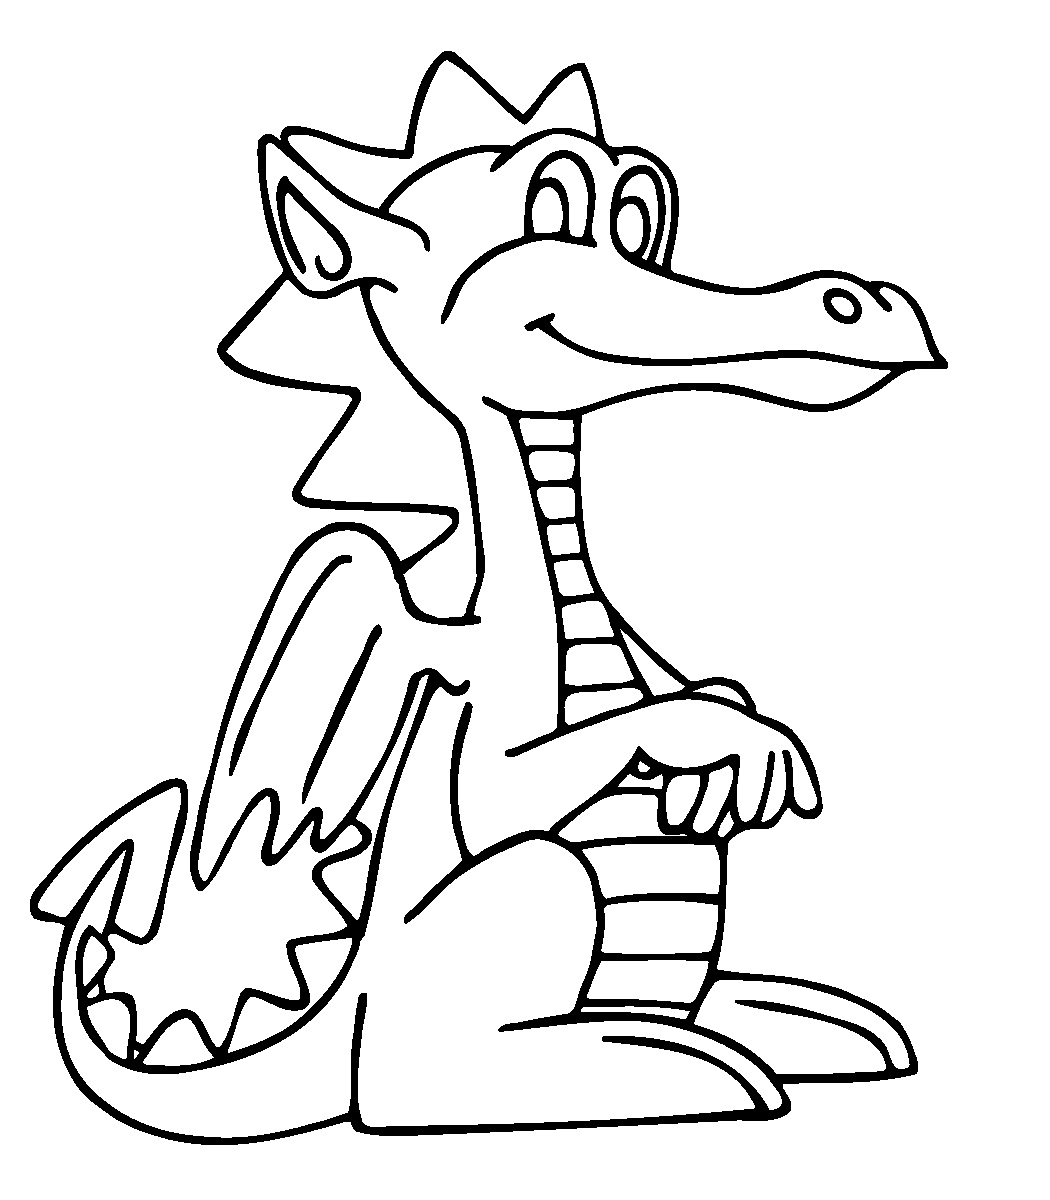 Dragon clipart black and white for kids